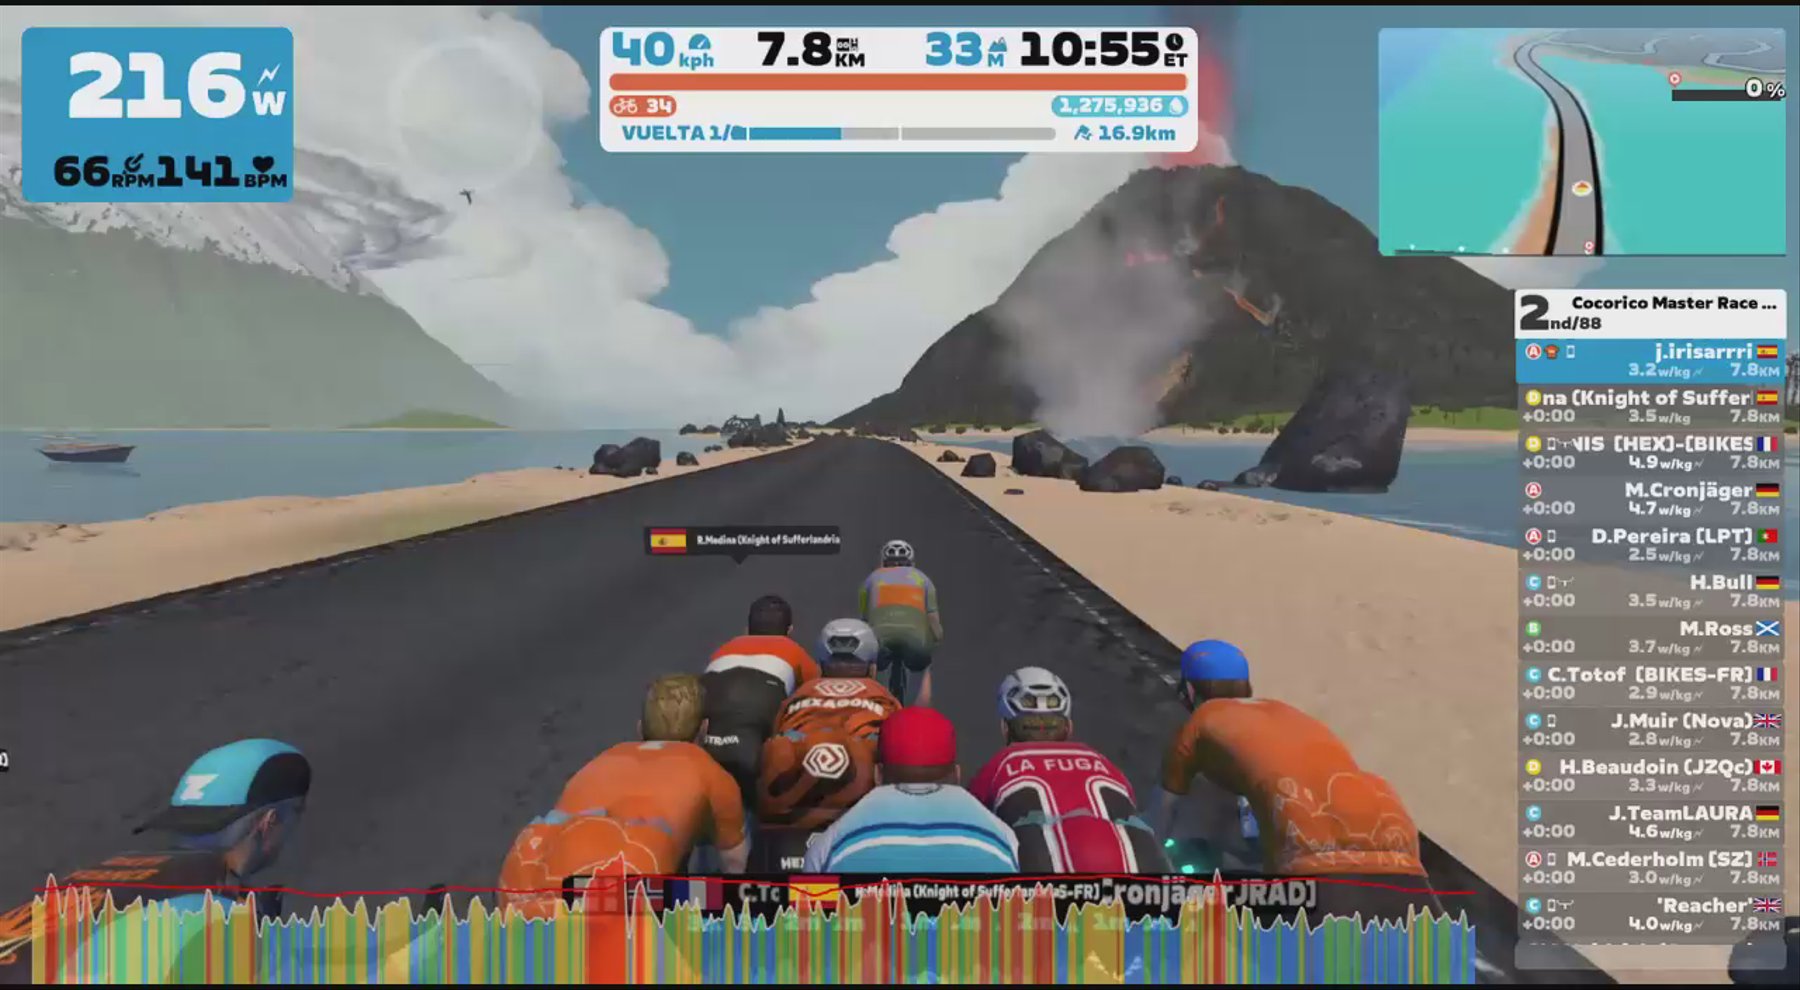 Zwift - Race: Cocorico Master Race League - Bikes France (A) on Volcano Flat in Watopia